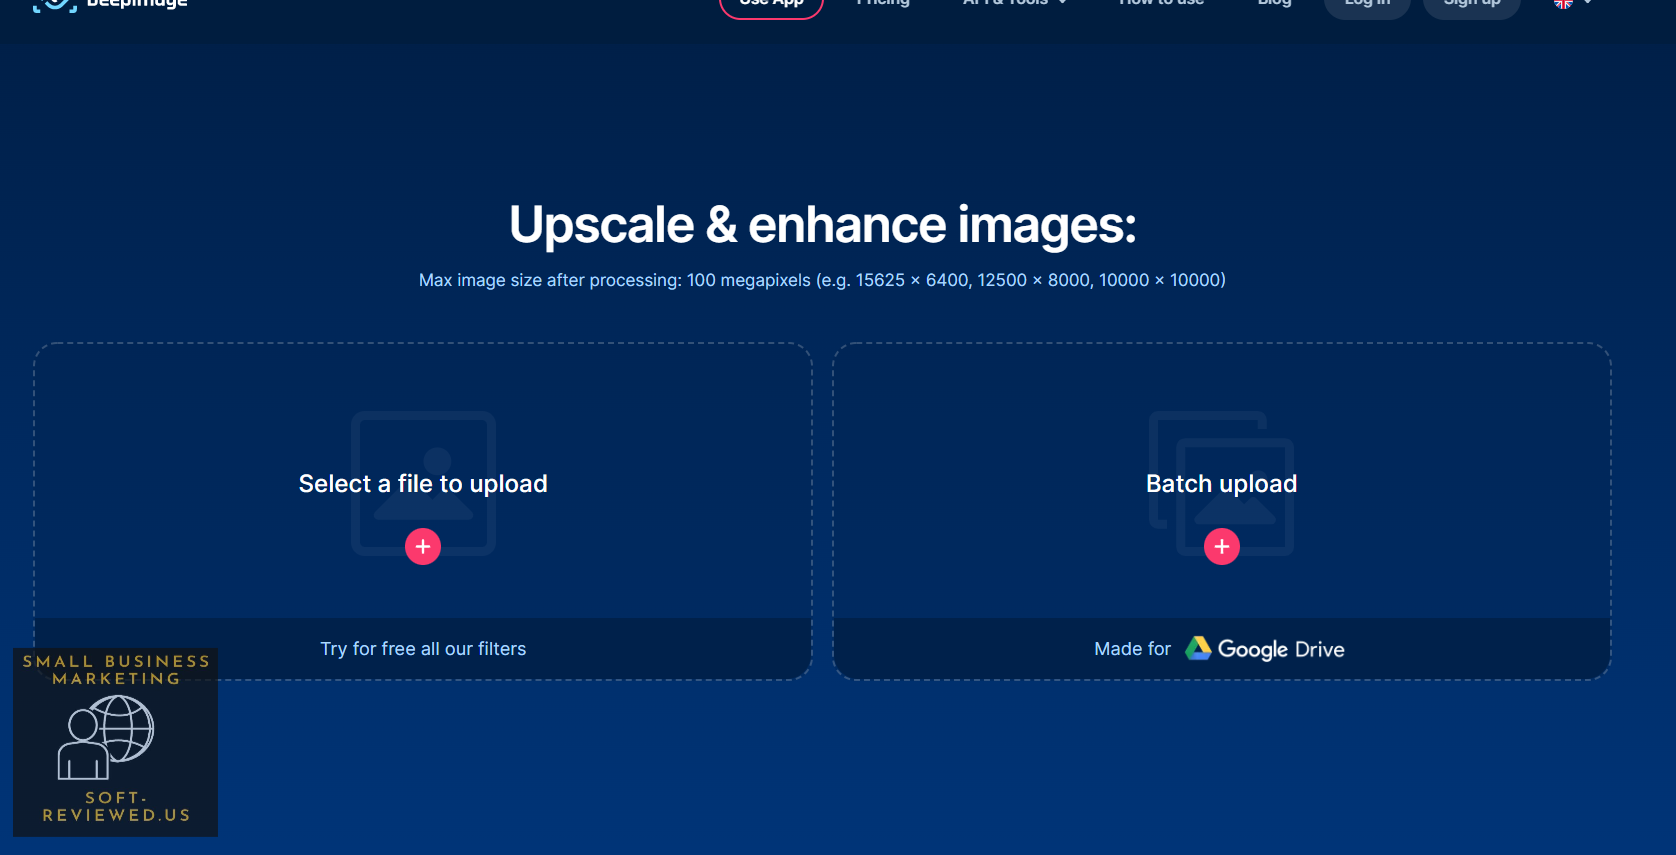 Upscale and enhance images for free with this amazing tool